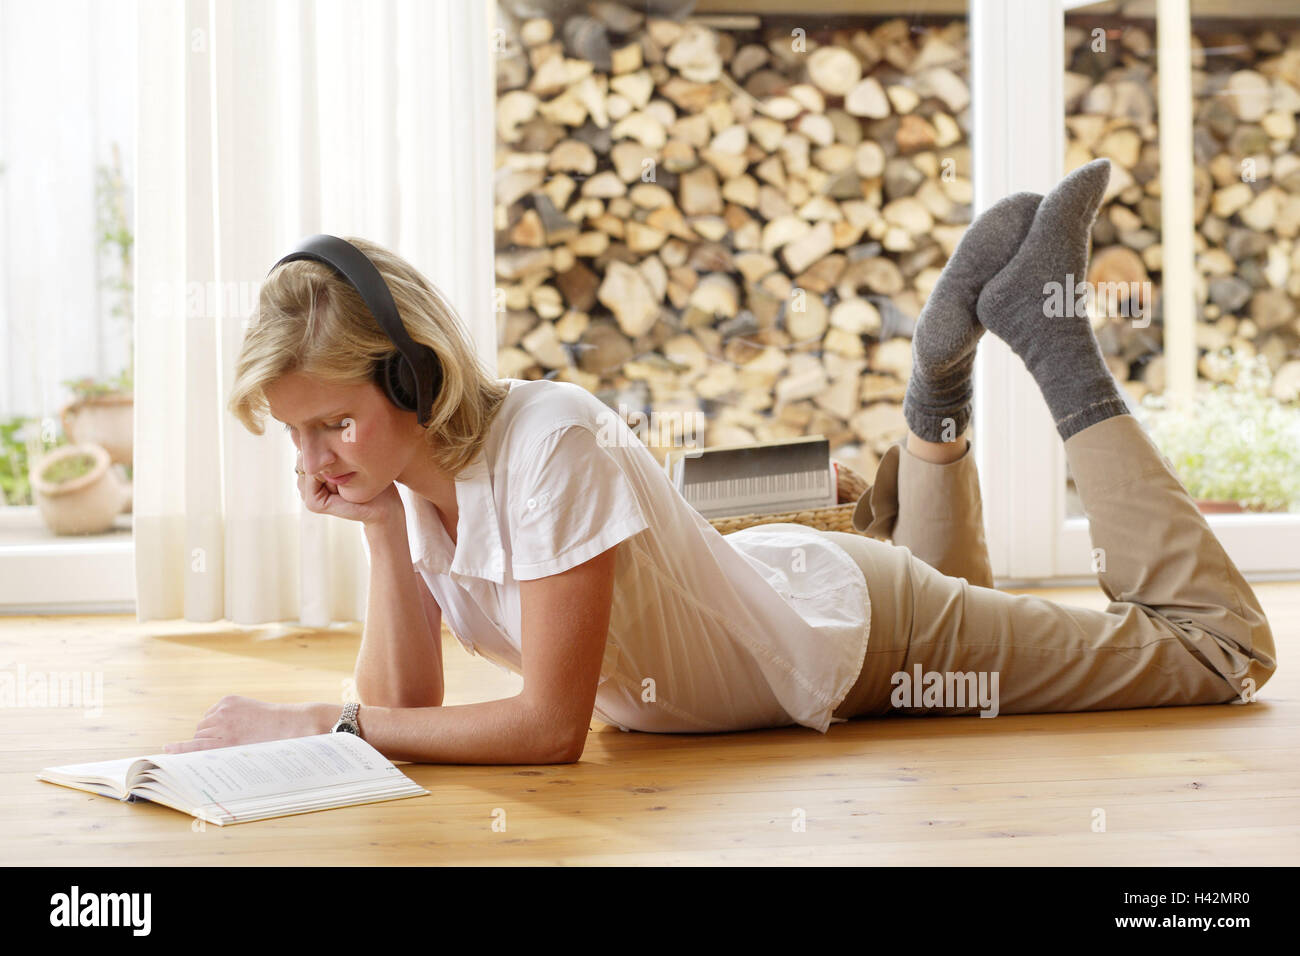 Woman, young, earphones, book, read, lie, floor, flat, room, hobby, person, literature, textbook, foreign language, learn, linguistic exchange rate, languages, music, hear, recreation, rest, relax, leisure time, whole body, lifestyle, inside, Stock Photo